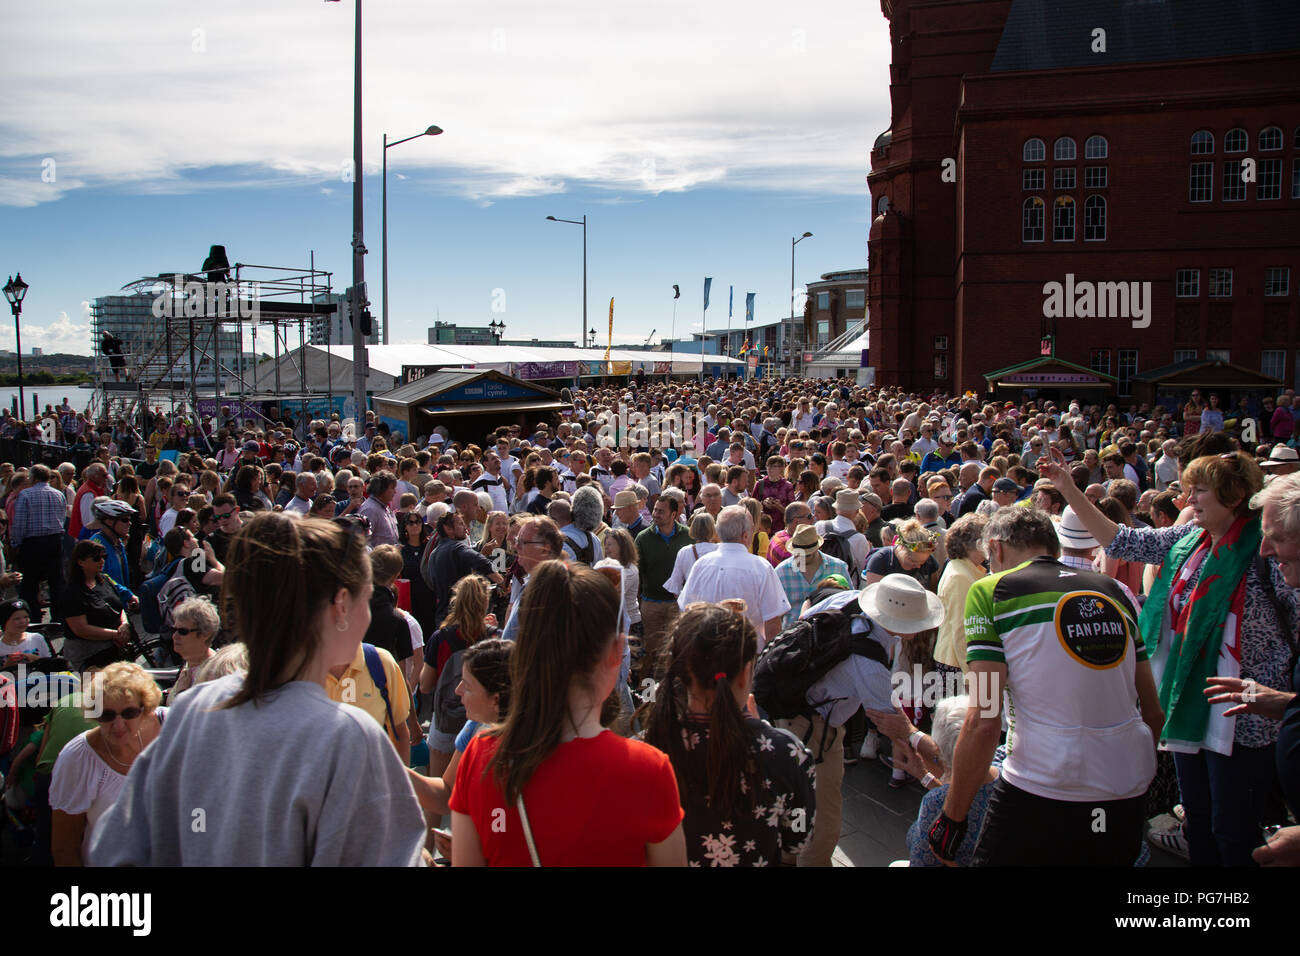 Part of a very large crowd outside the Senedd in Cardiff Bay welcoming Geraint Thomas, winner of the 2018 Tour de France. Stock Photo